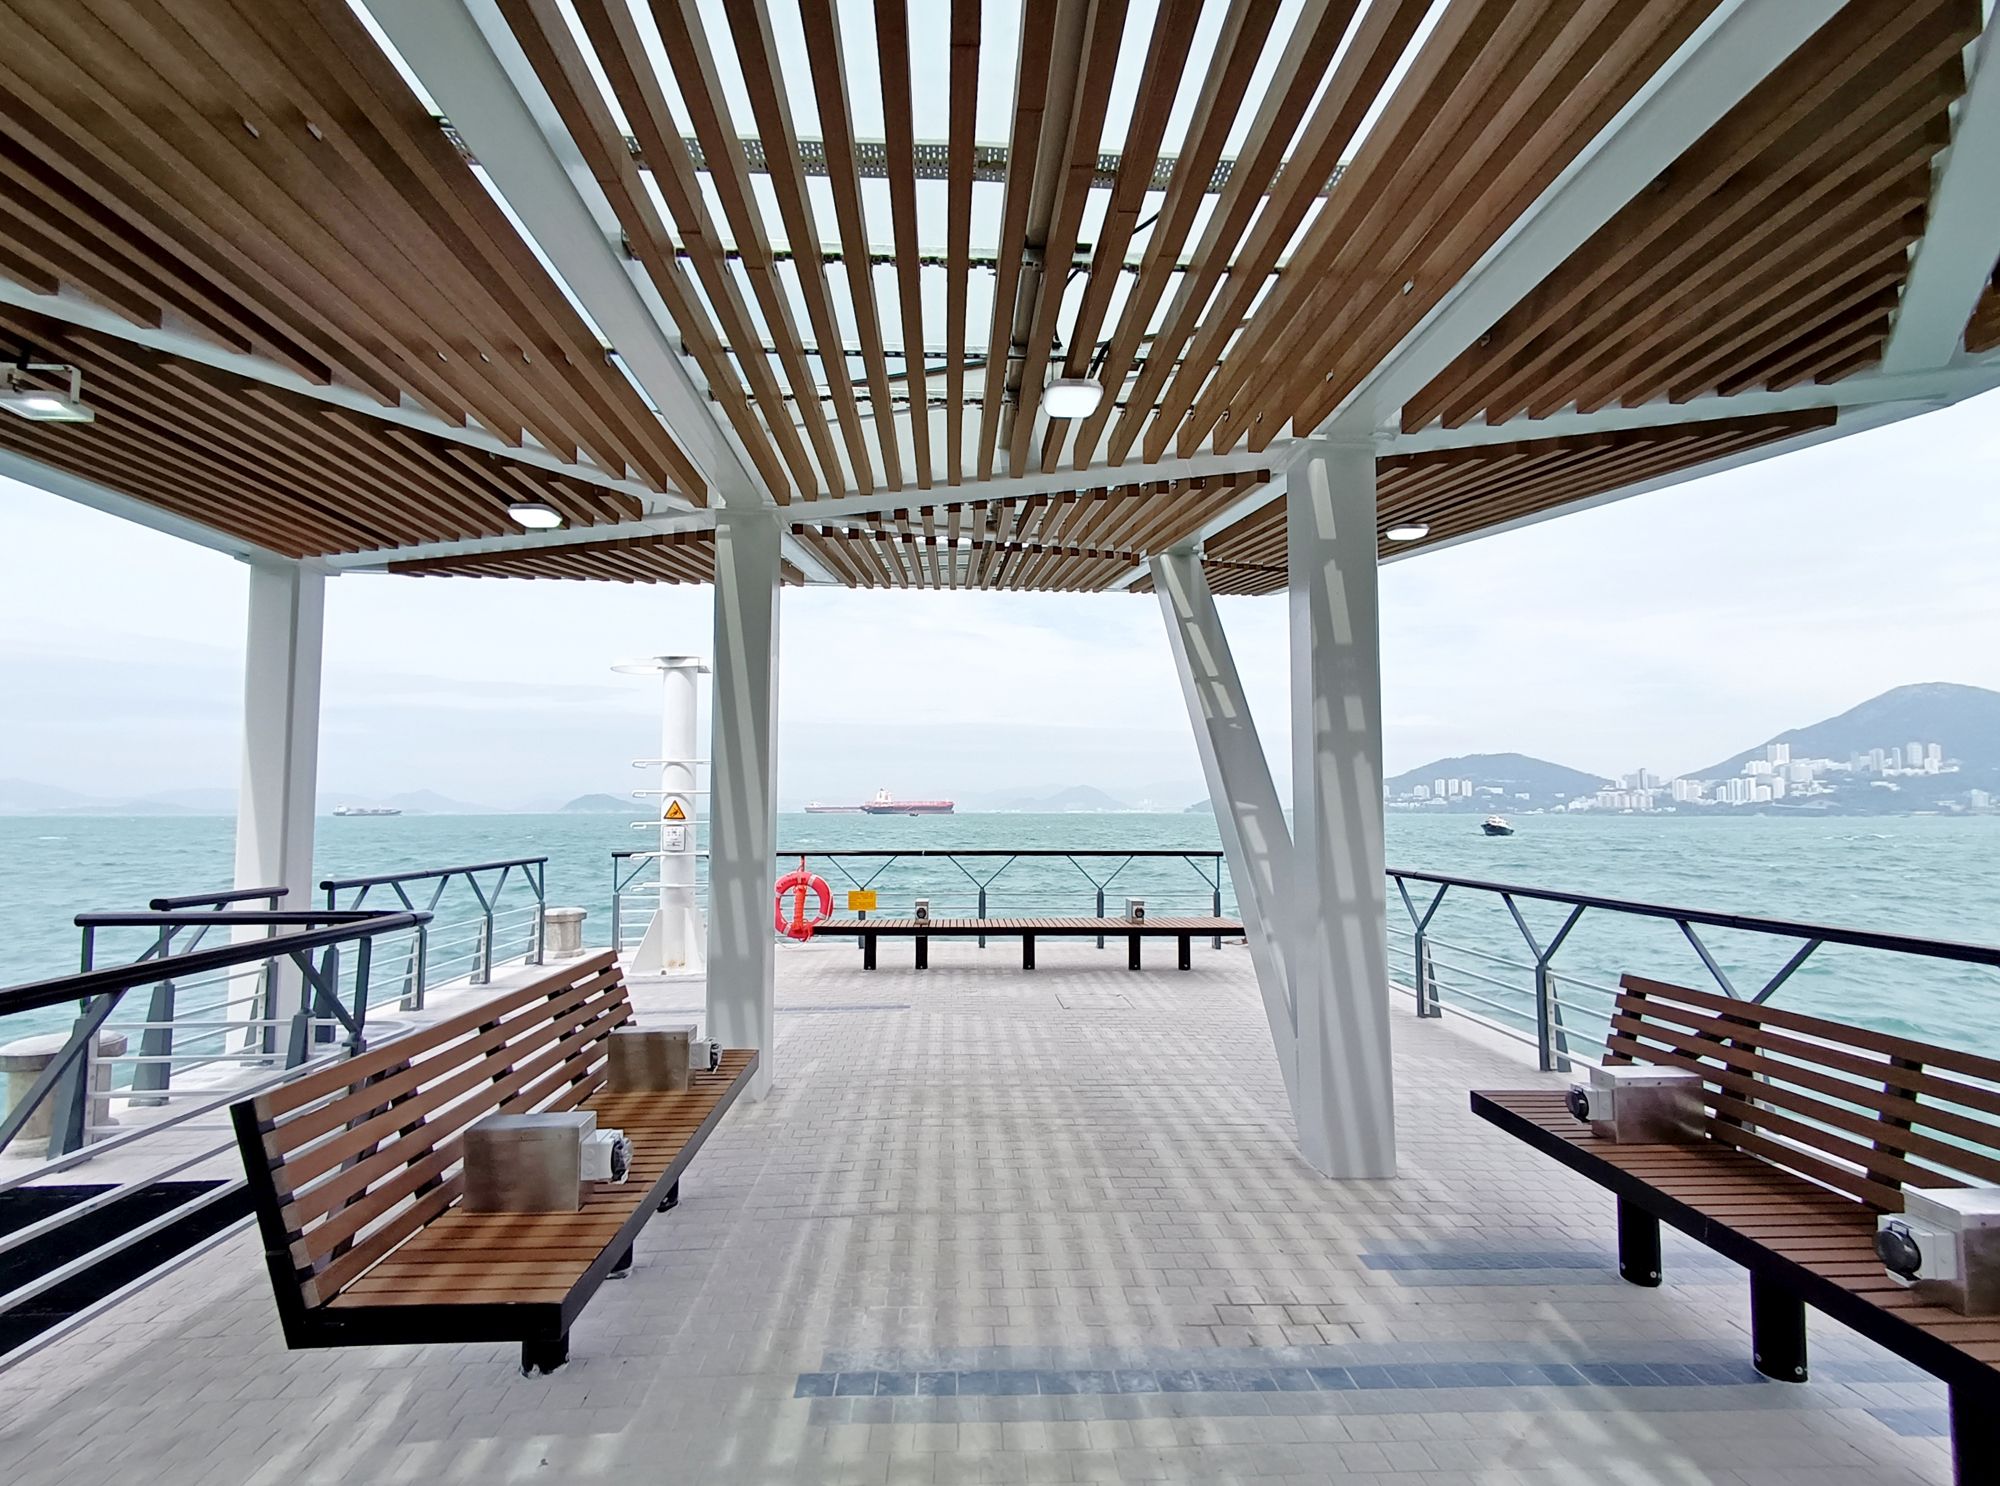 To blend in with the surrounding environment and take advantage of natural light, the roof cover of the pier is made of tempered glass and environmentally-friendly wooden trellis.